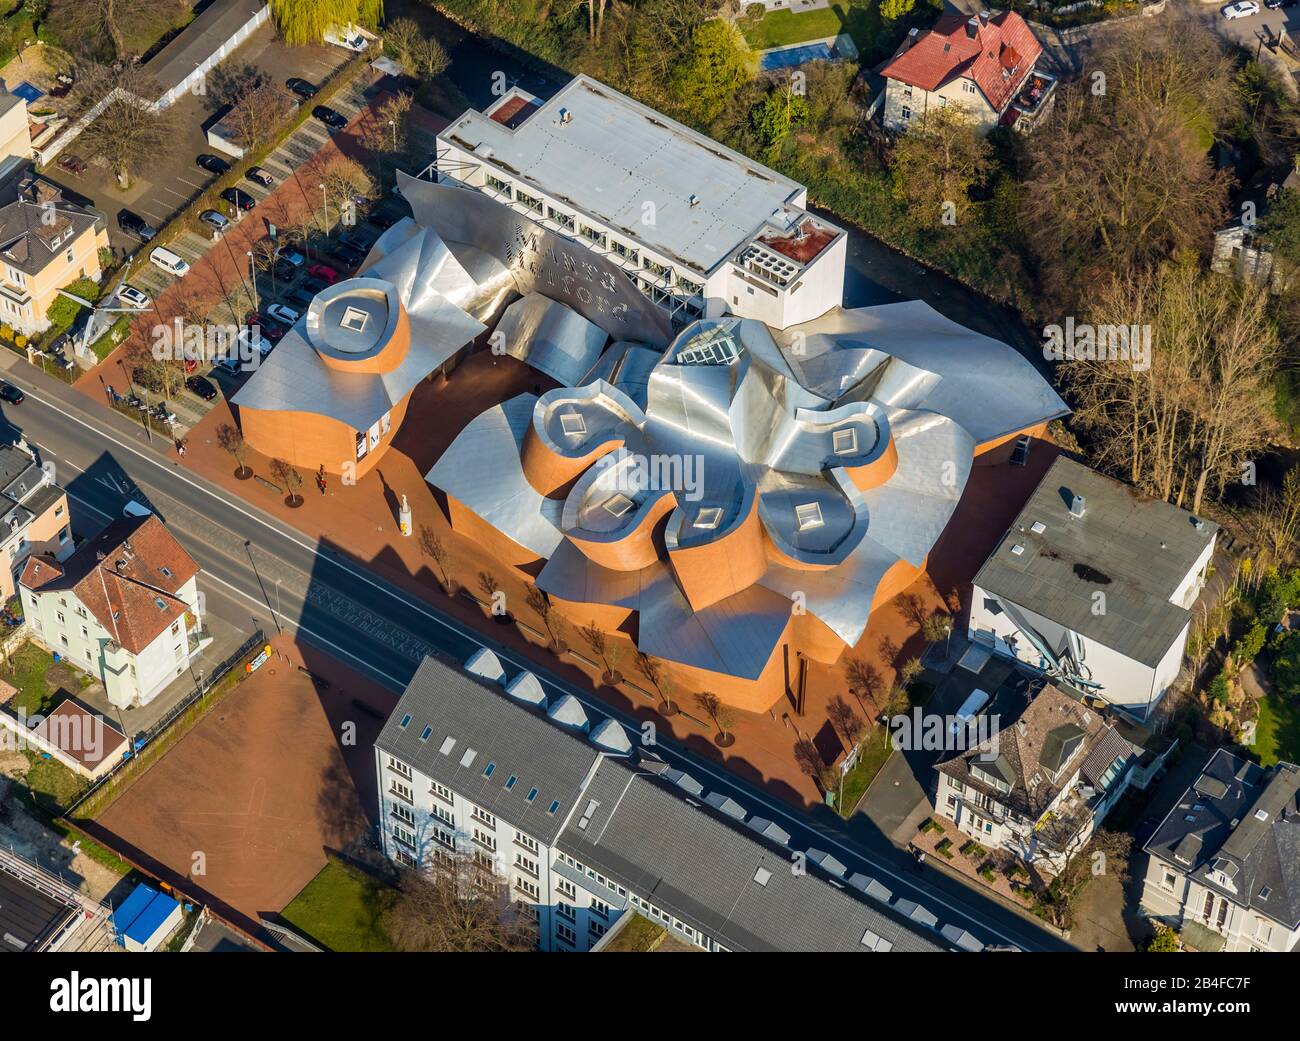 Aerial view of Museum MARTa in Herford, Marta Herford Museum of Art, Architecture, Design in Ostwestfalen in the state of North Rhine-Westphalia, Germany. Stock Photo